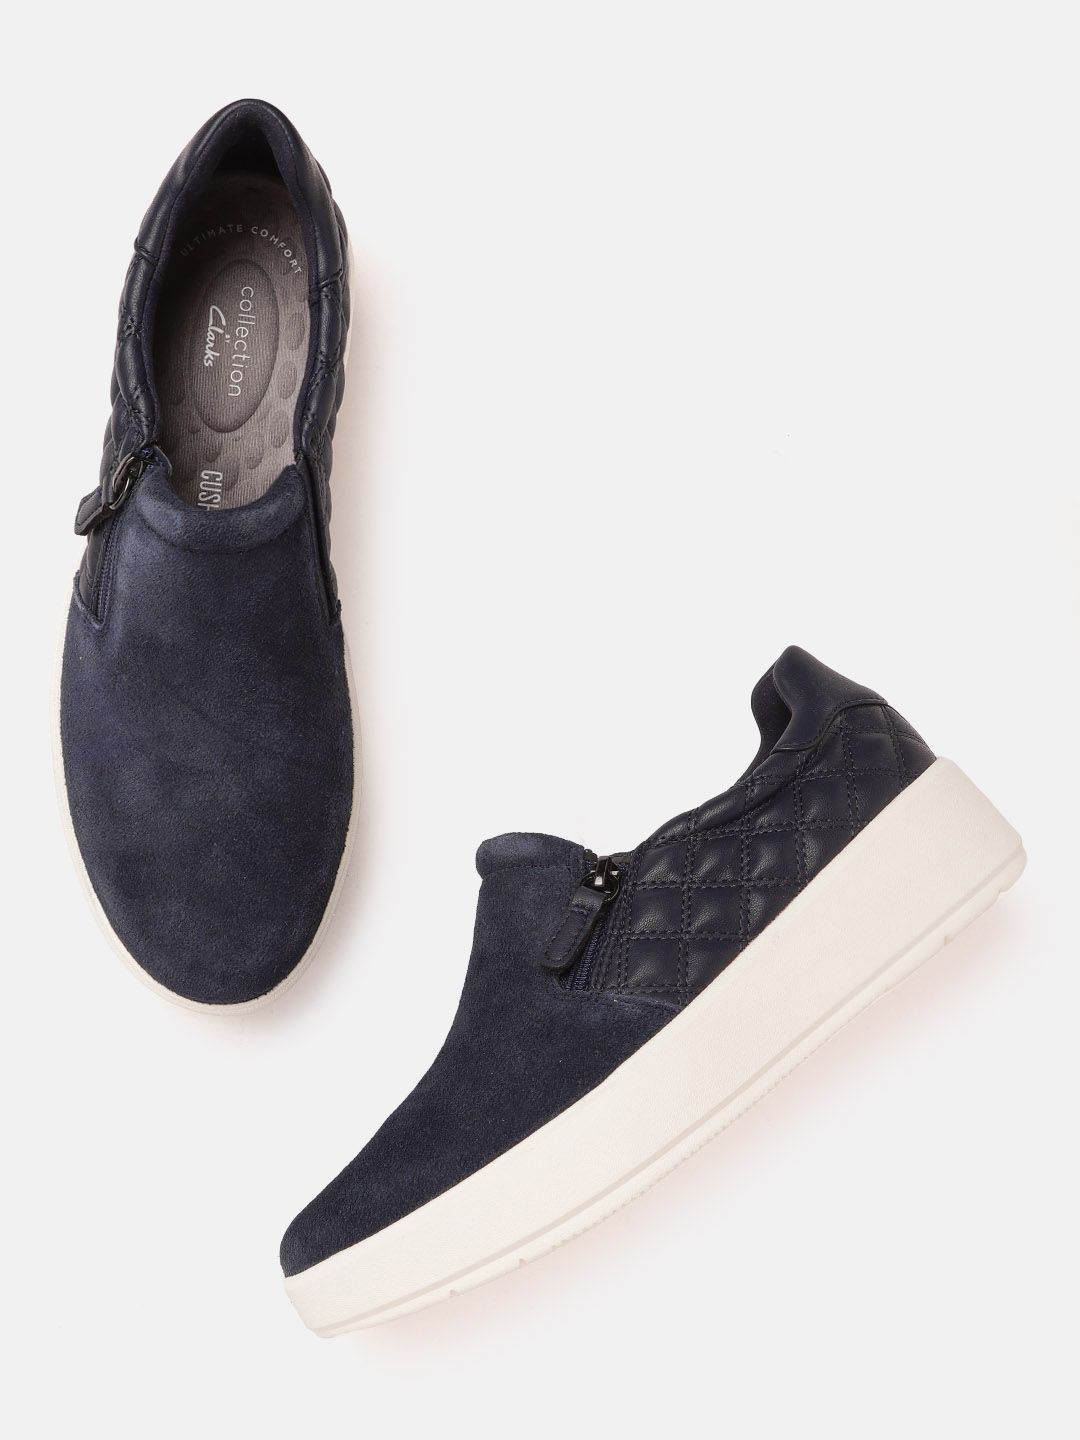 Clarks Women Navy Blue Quilted Leather Sneakers Price in India